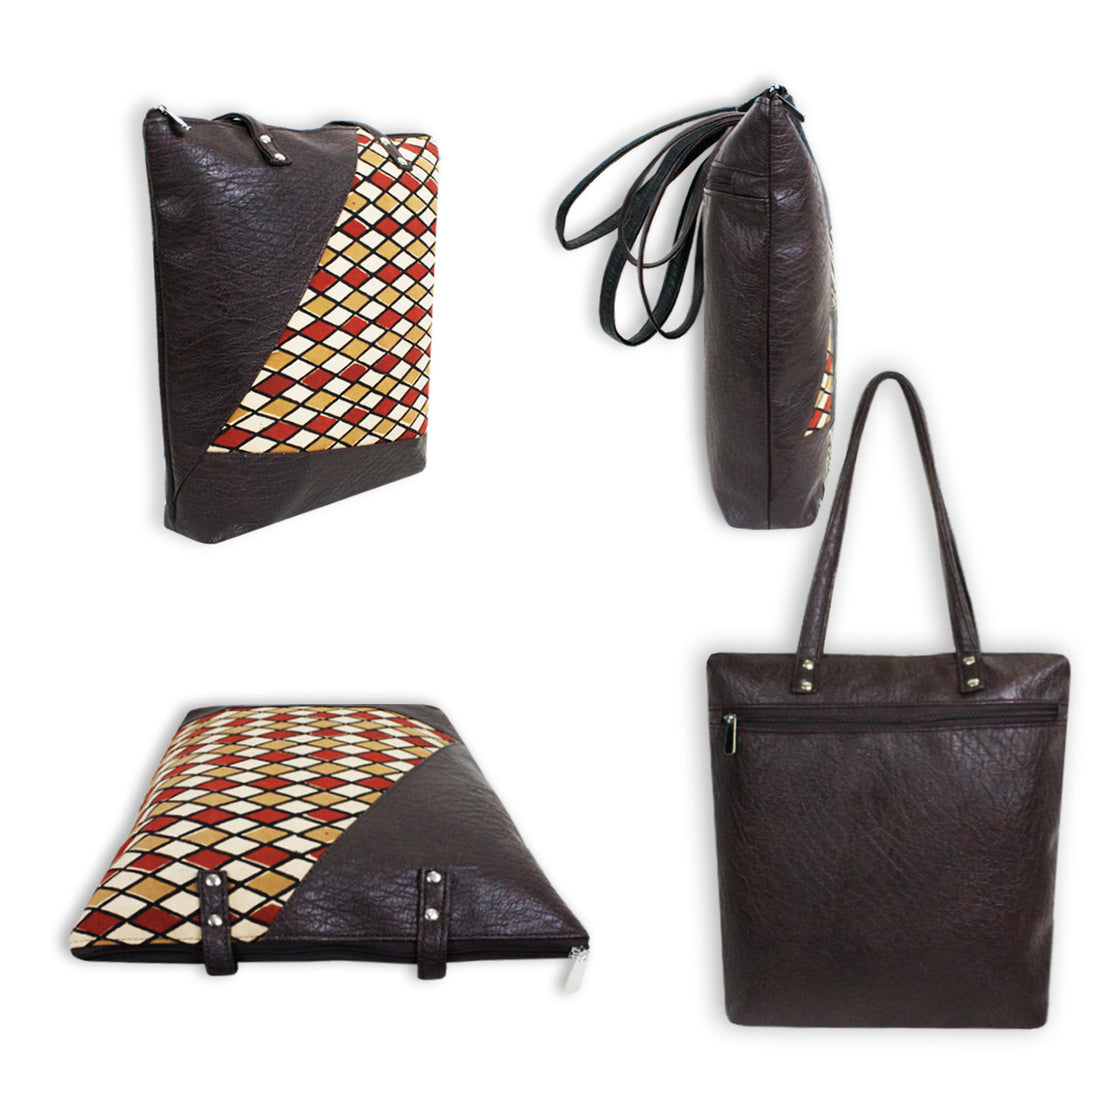 The Kites Tote/Pouch Combo